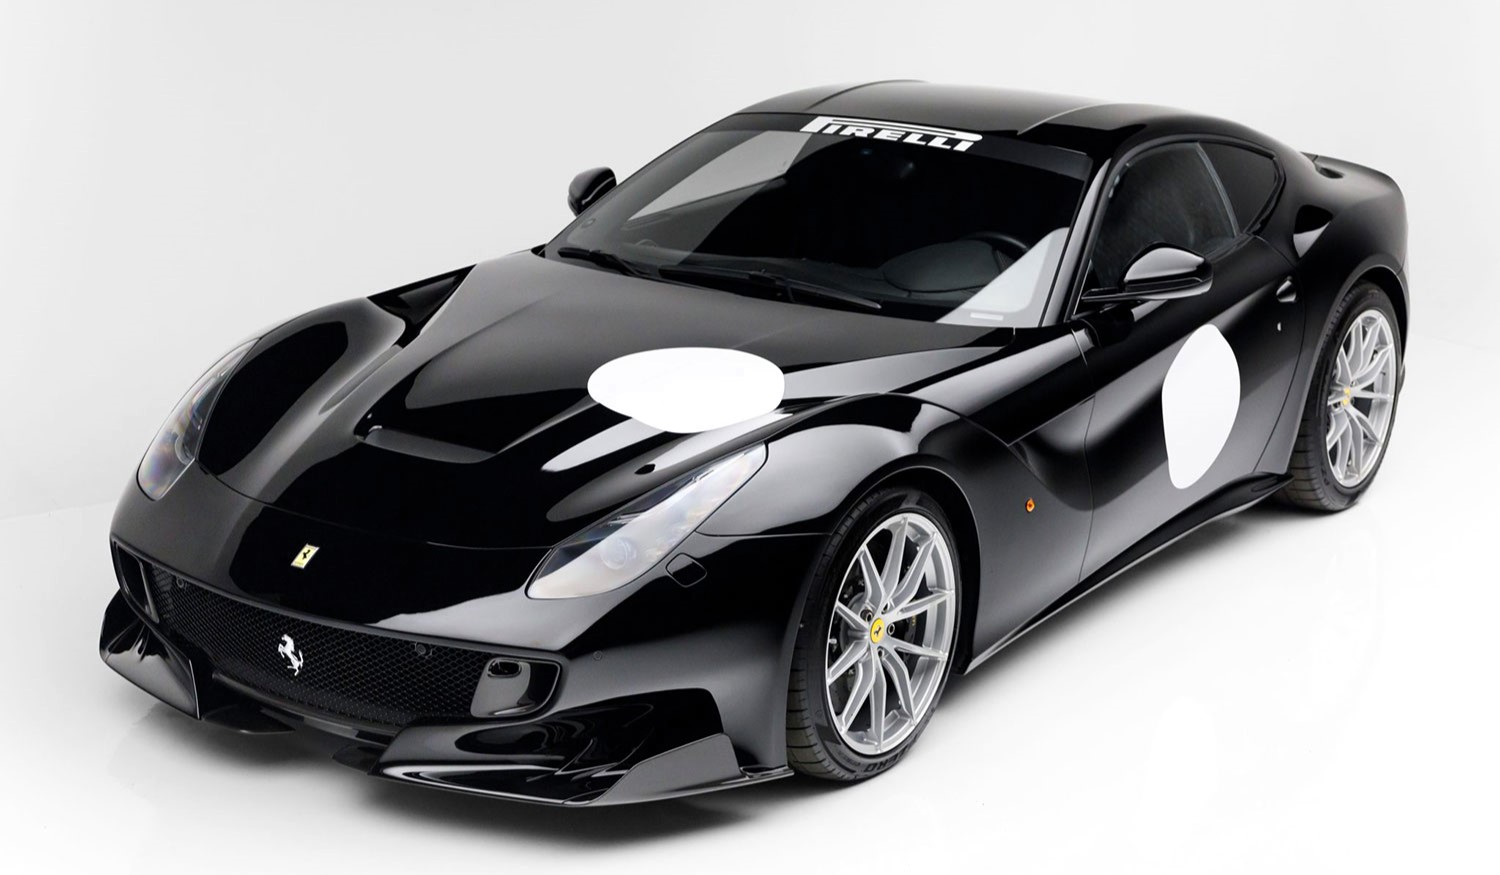 Discover the unique 2014 Ferrari F12 Berlinetta prototype, with a capped speed of 15mph. Despite its limitations, it's a collector's dream at £380,000.